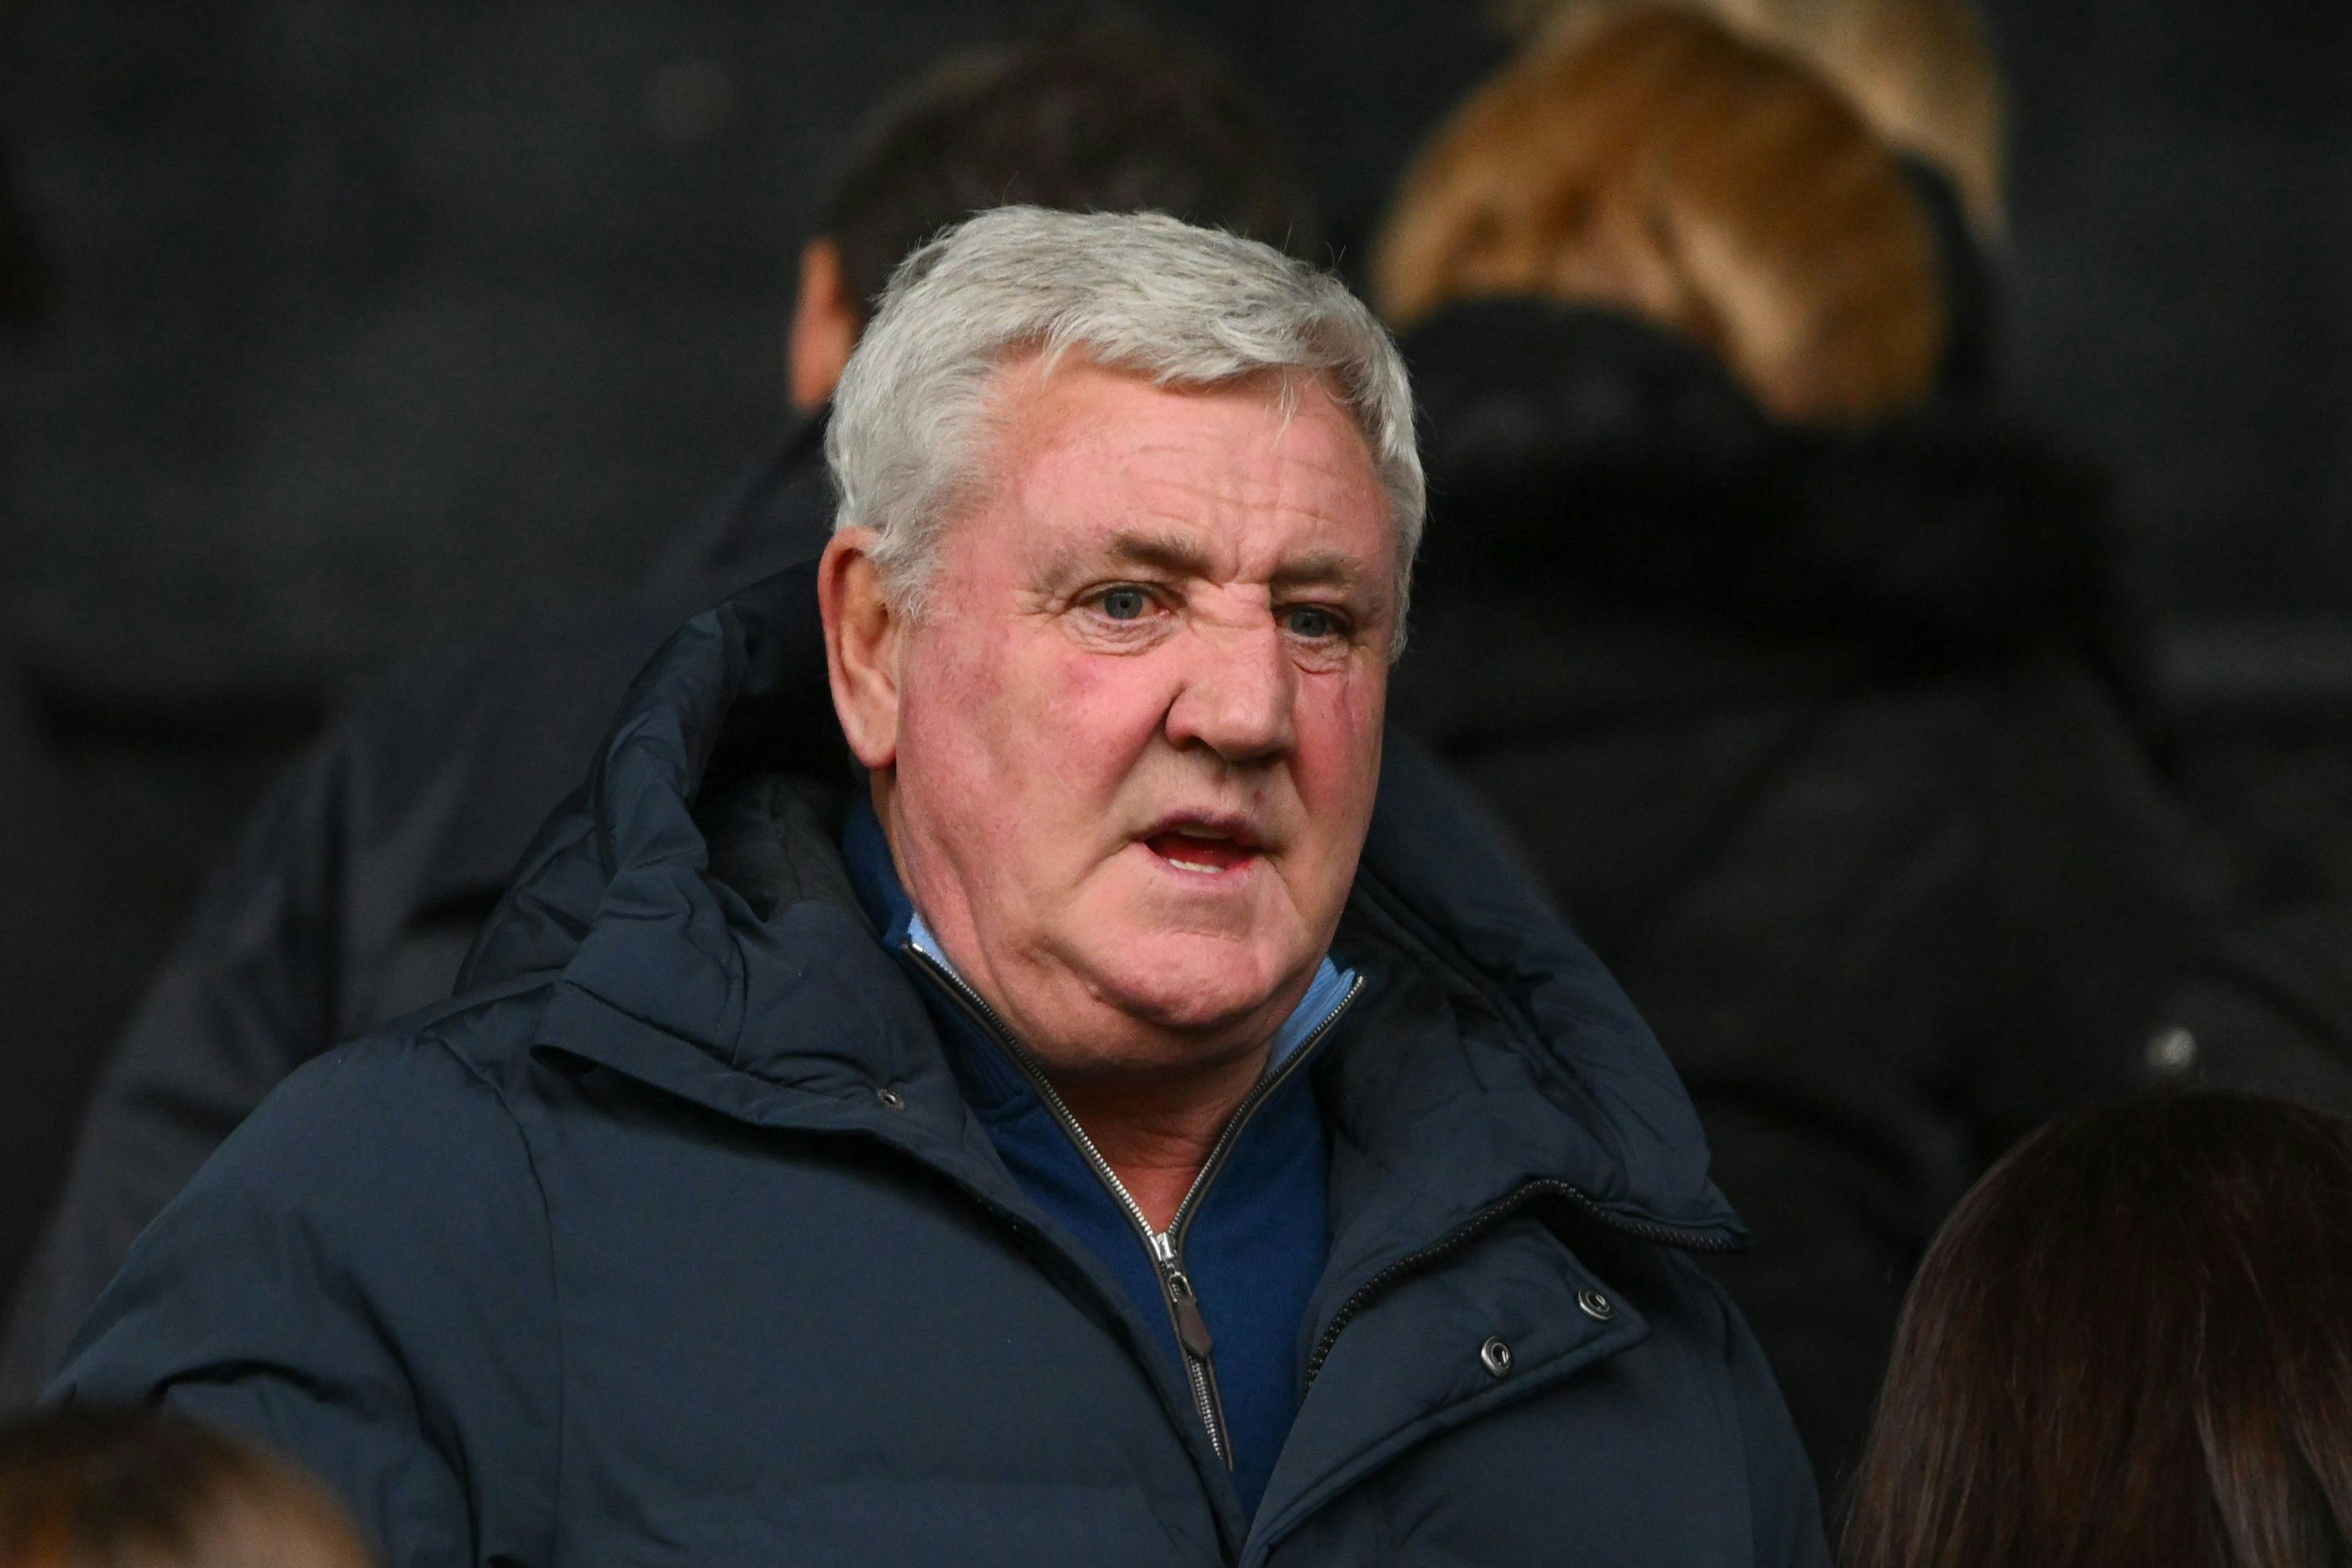 Steve Bruce is attending the Sky Bet League 2 match between Notts County and Salford City